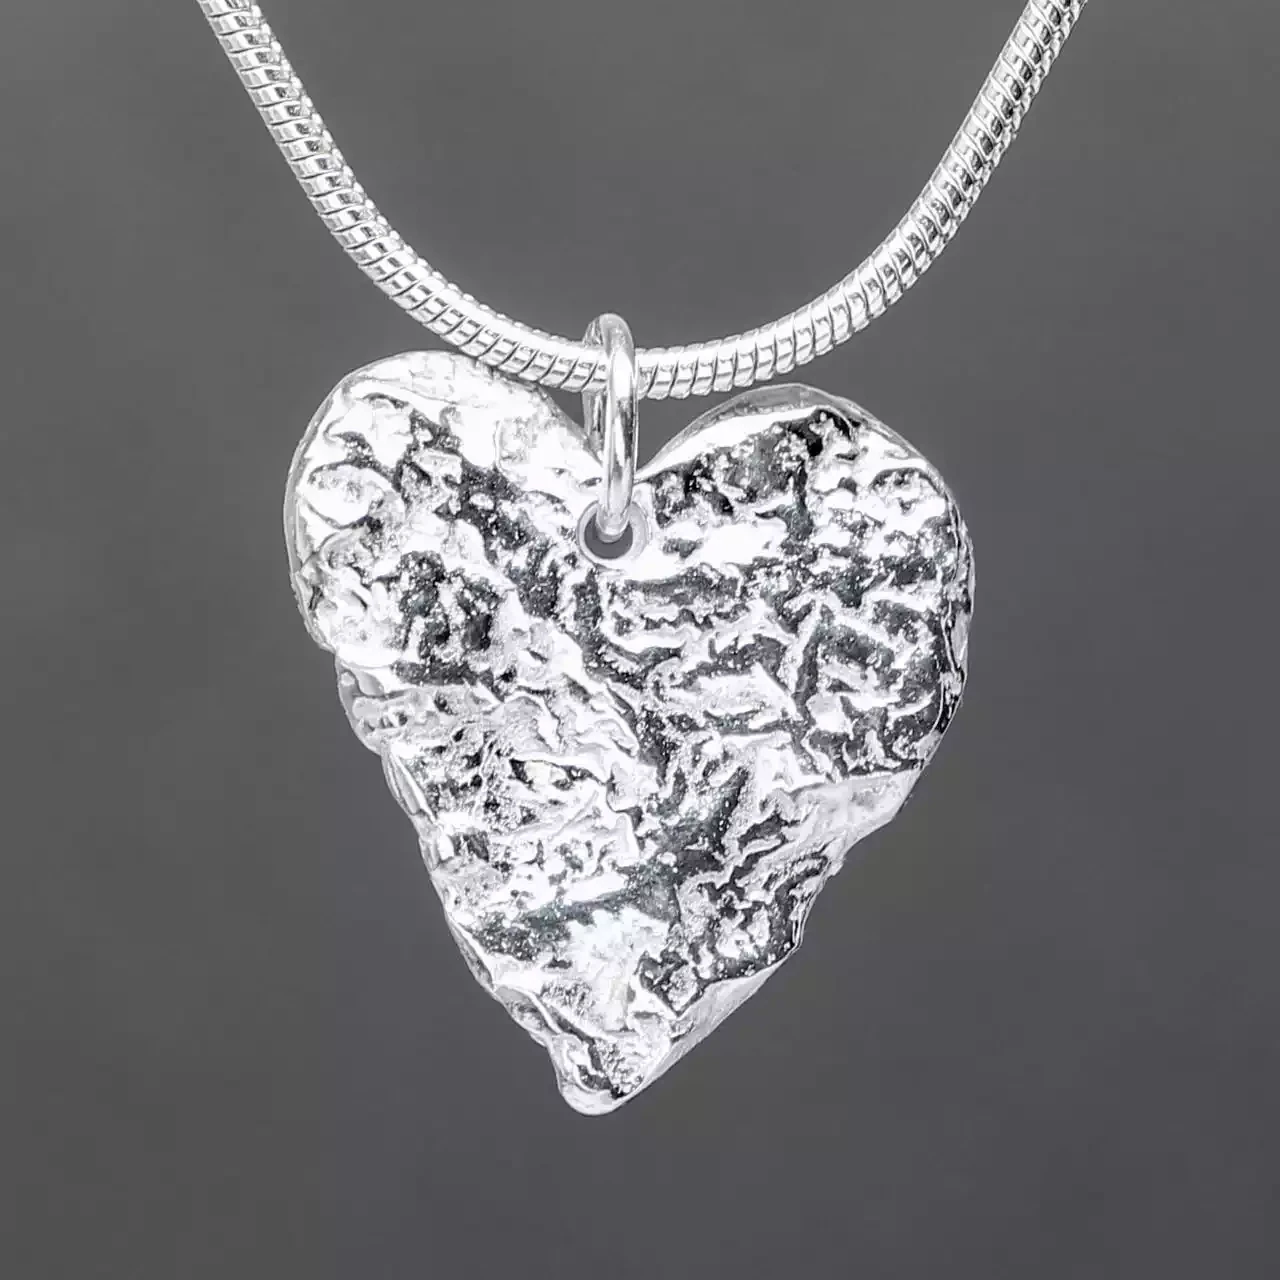 Melt My Heart Silver Pendant - Large by Silverfish